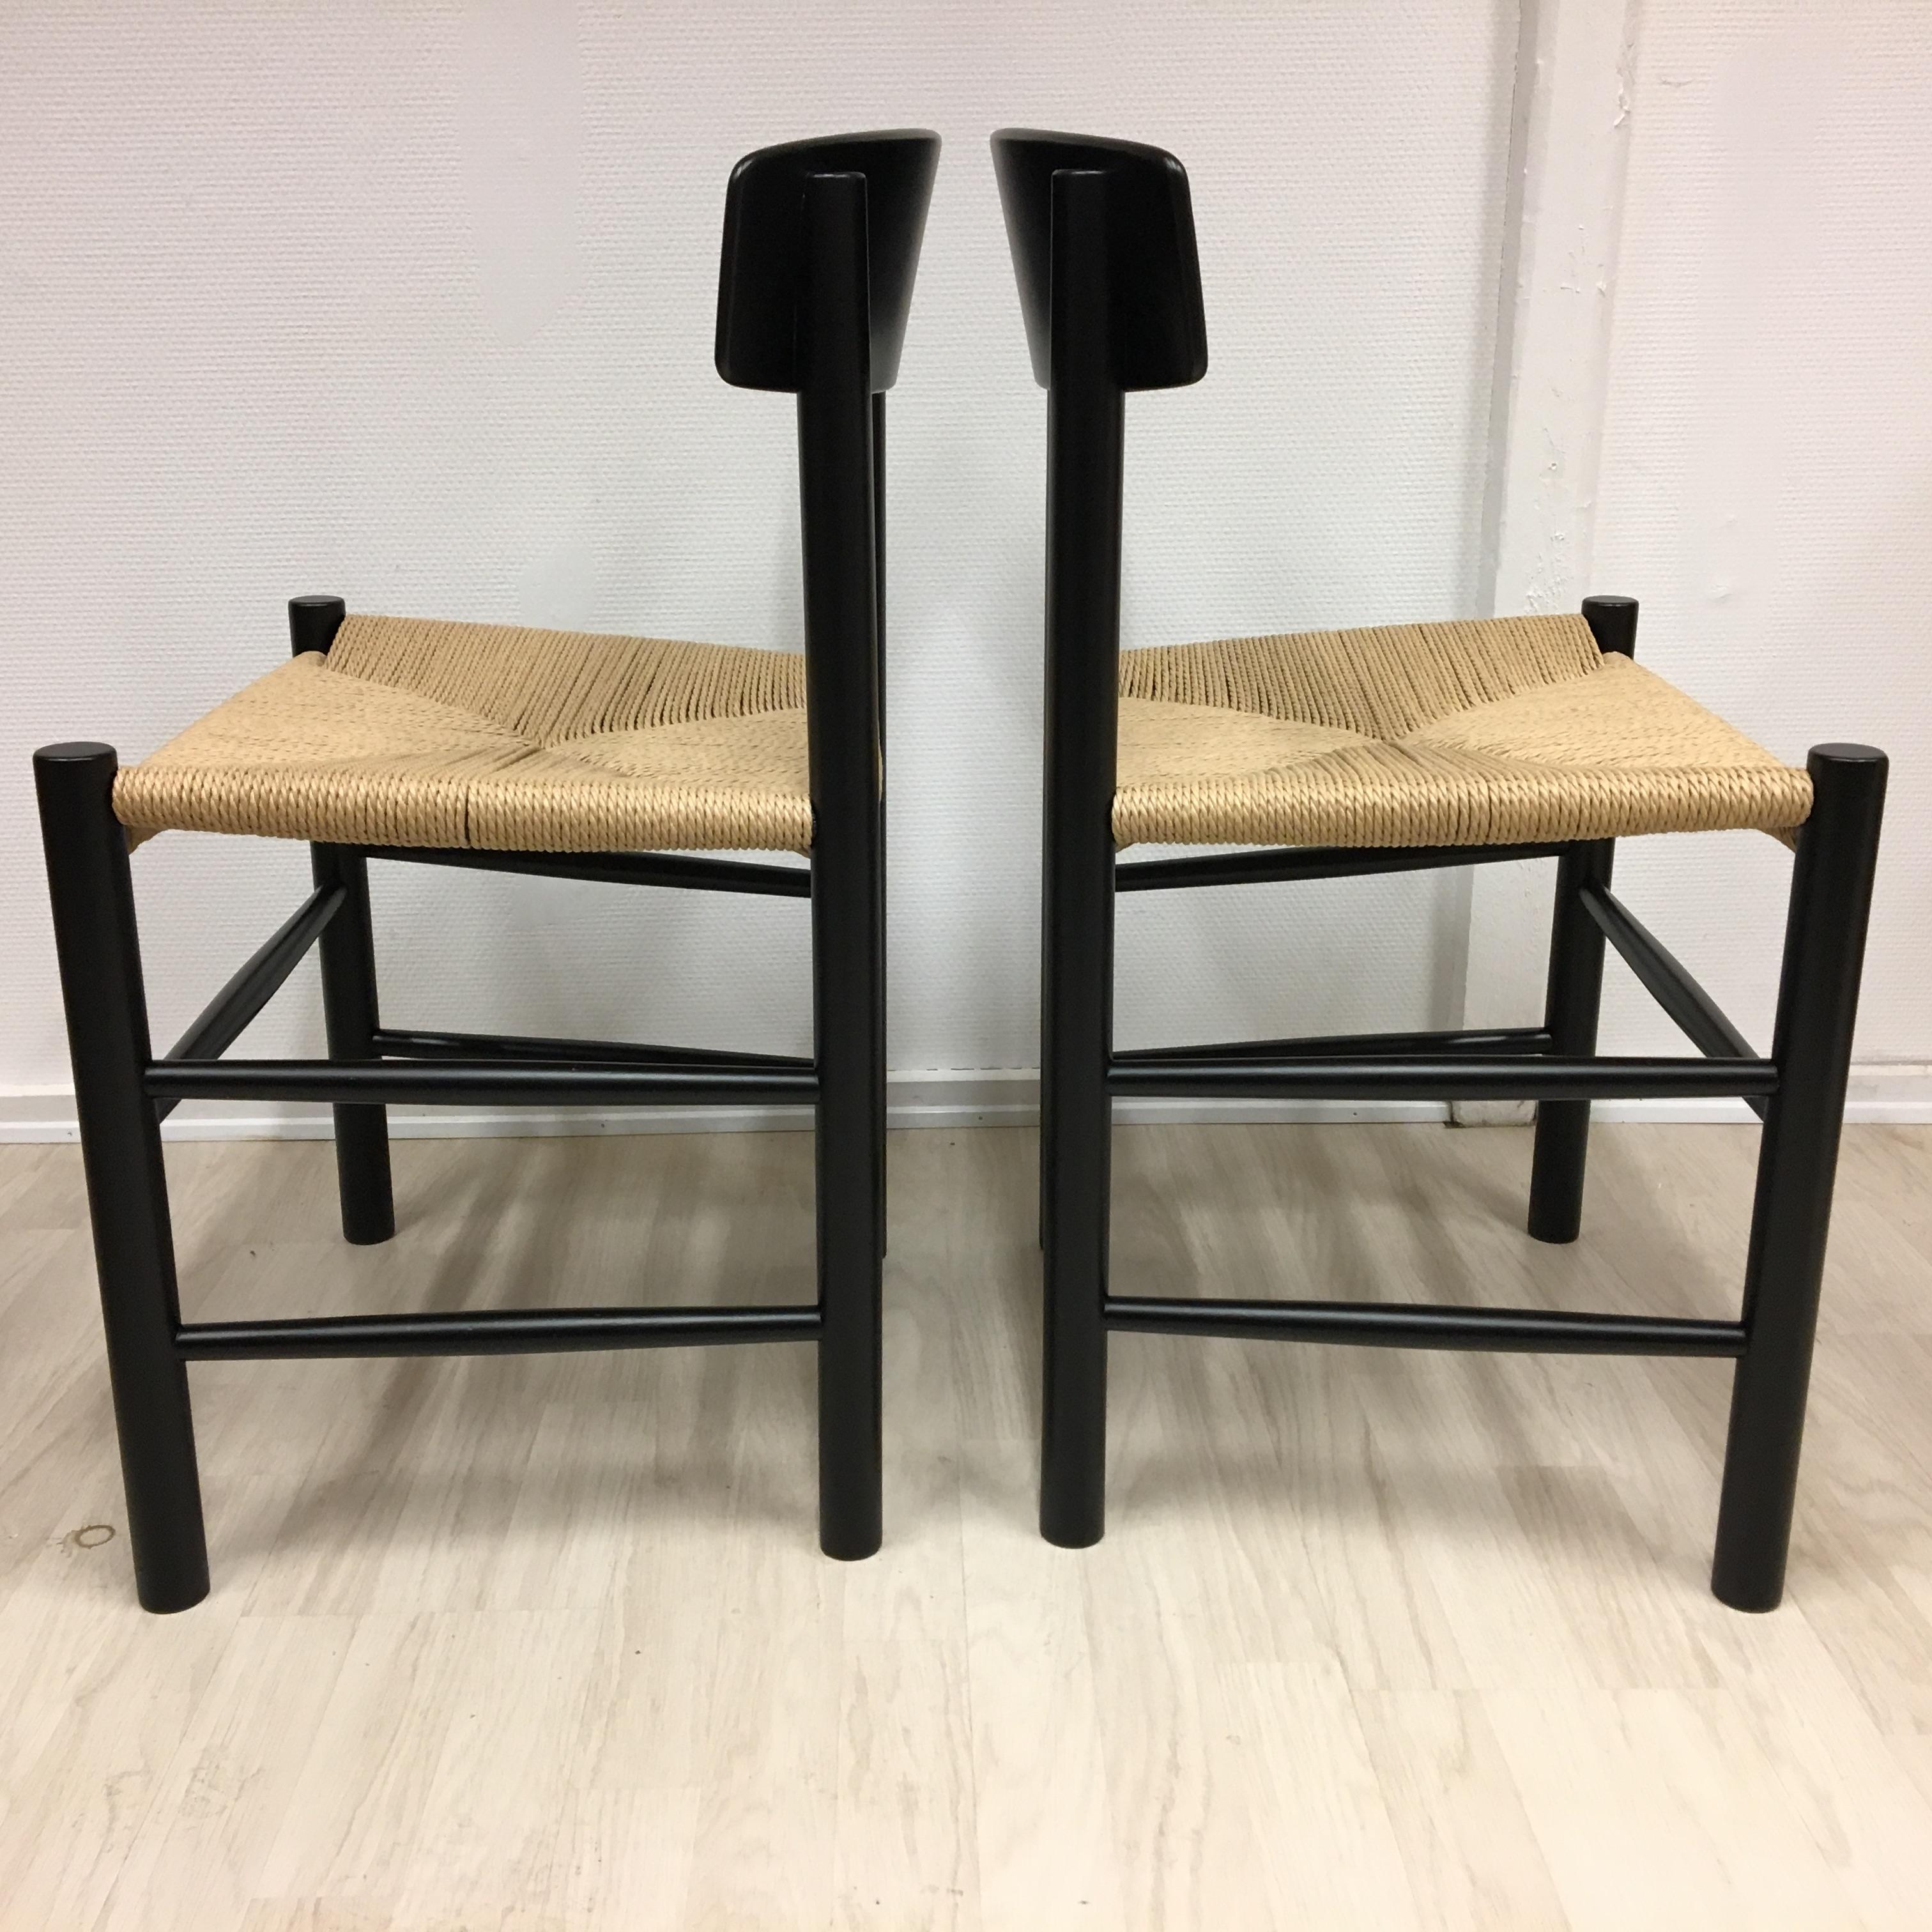 3Børge Mogensen 'Folkestole' Dining Chairs J39 Black Lacquer with New Paper Cord In Good Condition In Odense, Denmark